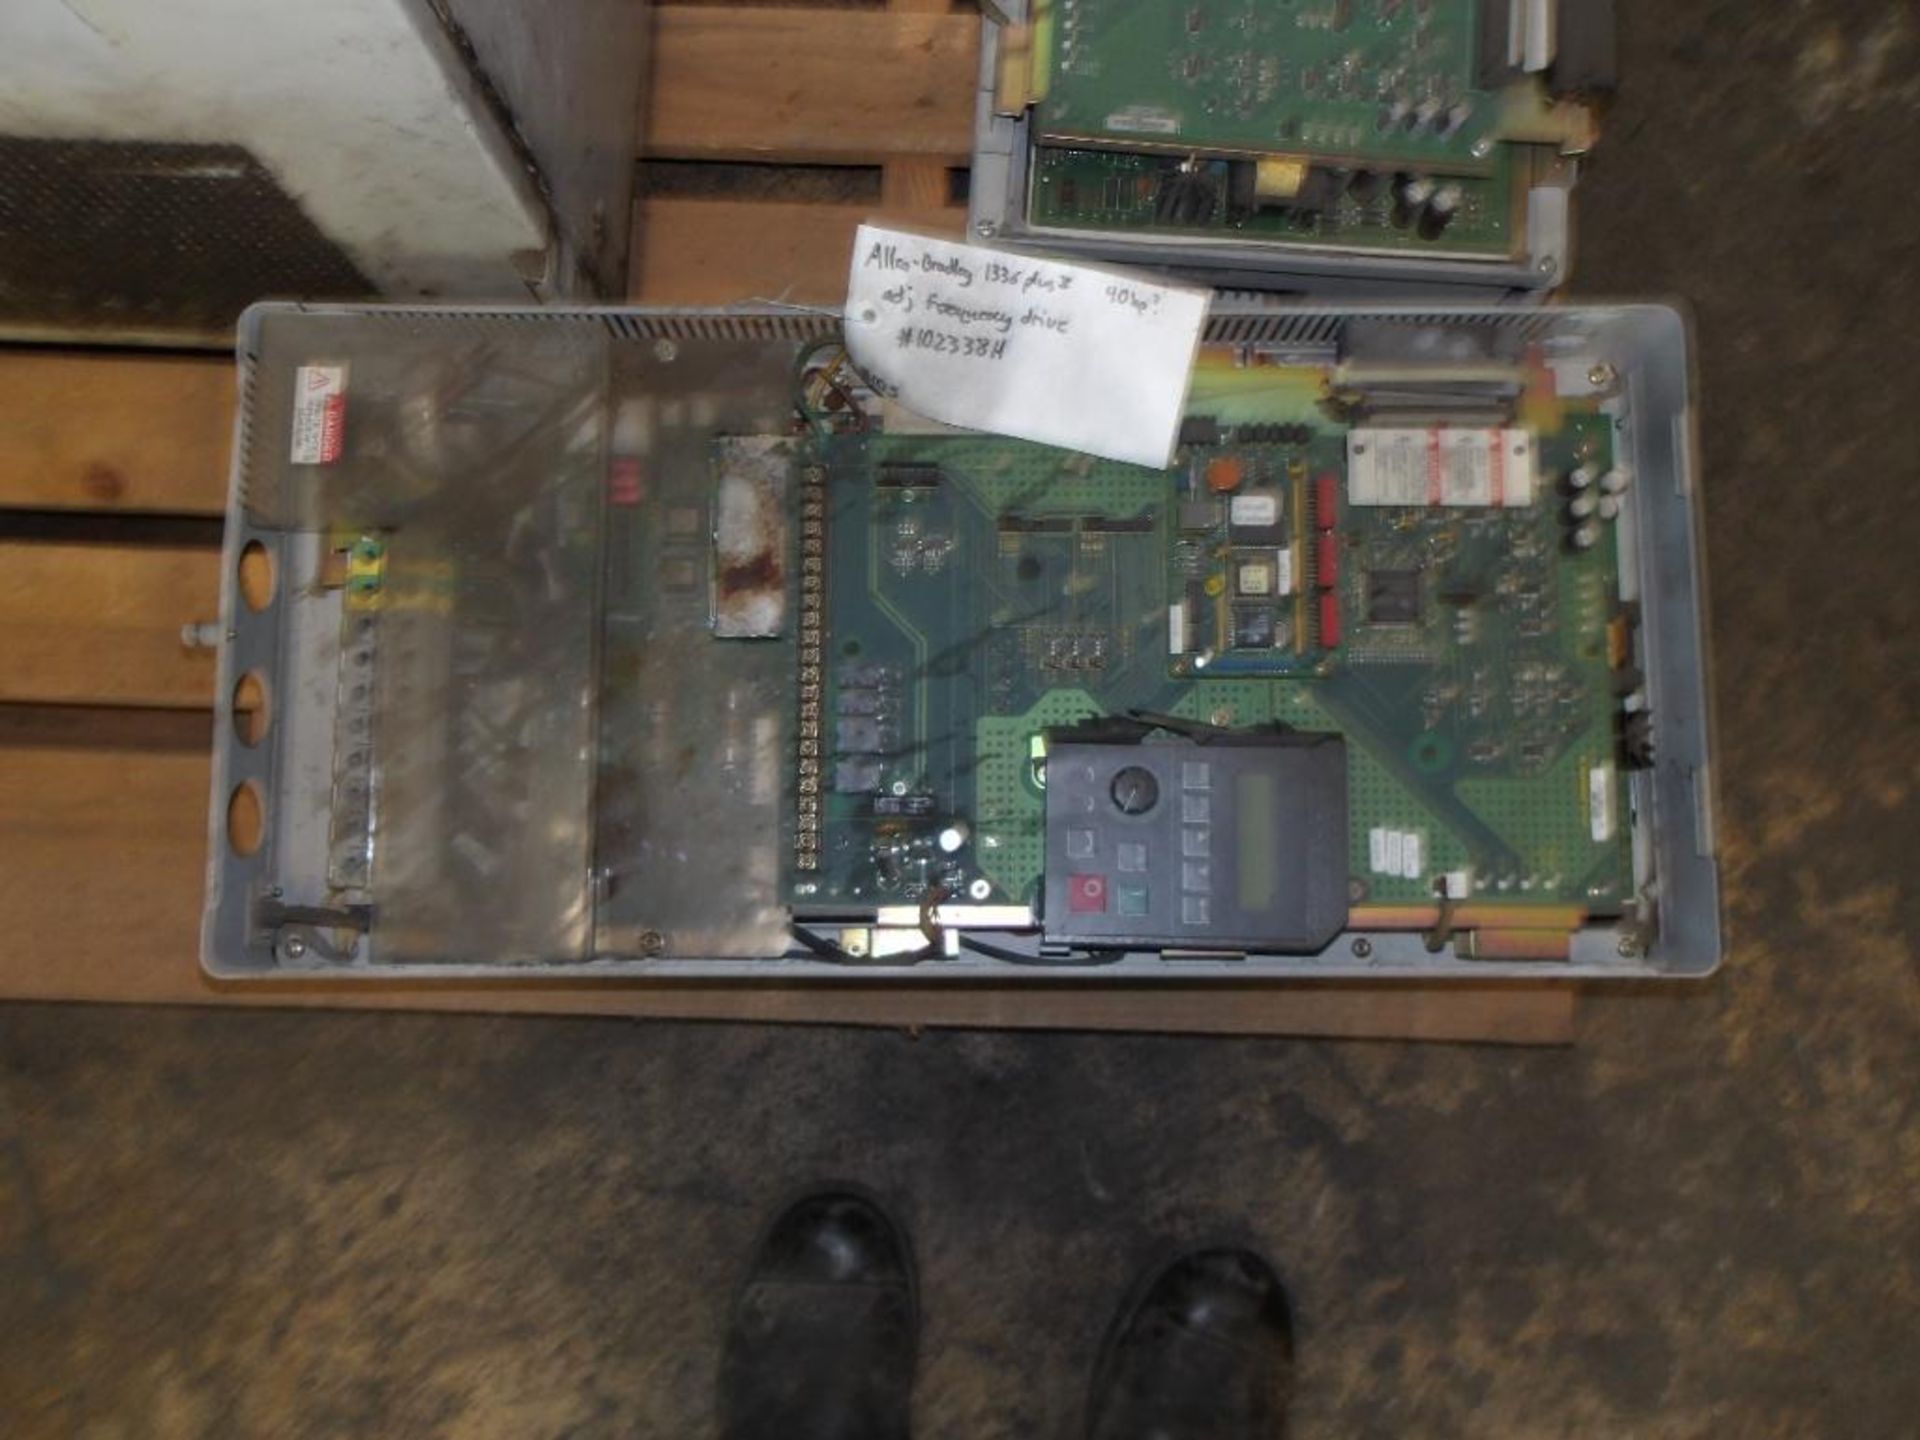 (1) Vectormark Controller, No. E0252A0315 & (2) Allen-Bradley Controllers, 1336 Plus 40HP (Used) - Image 2 of 4